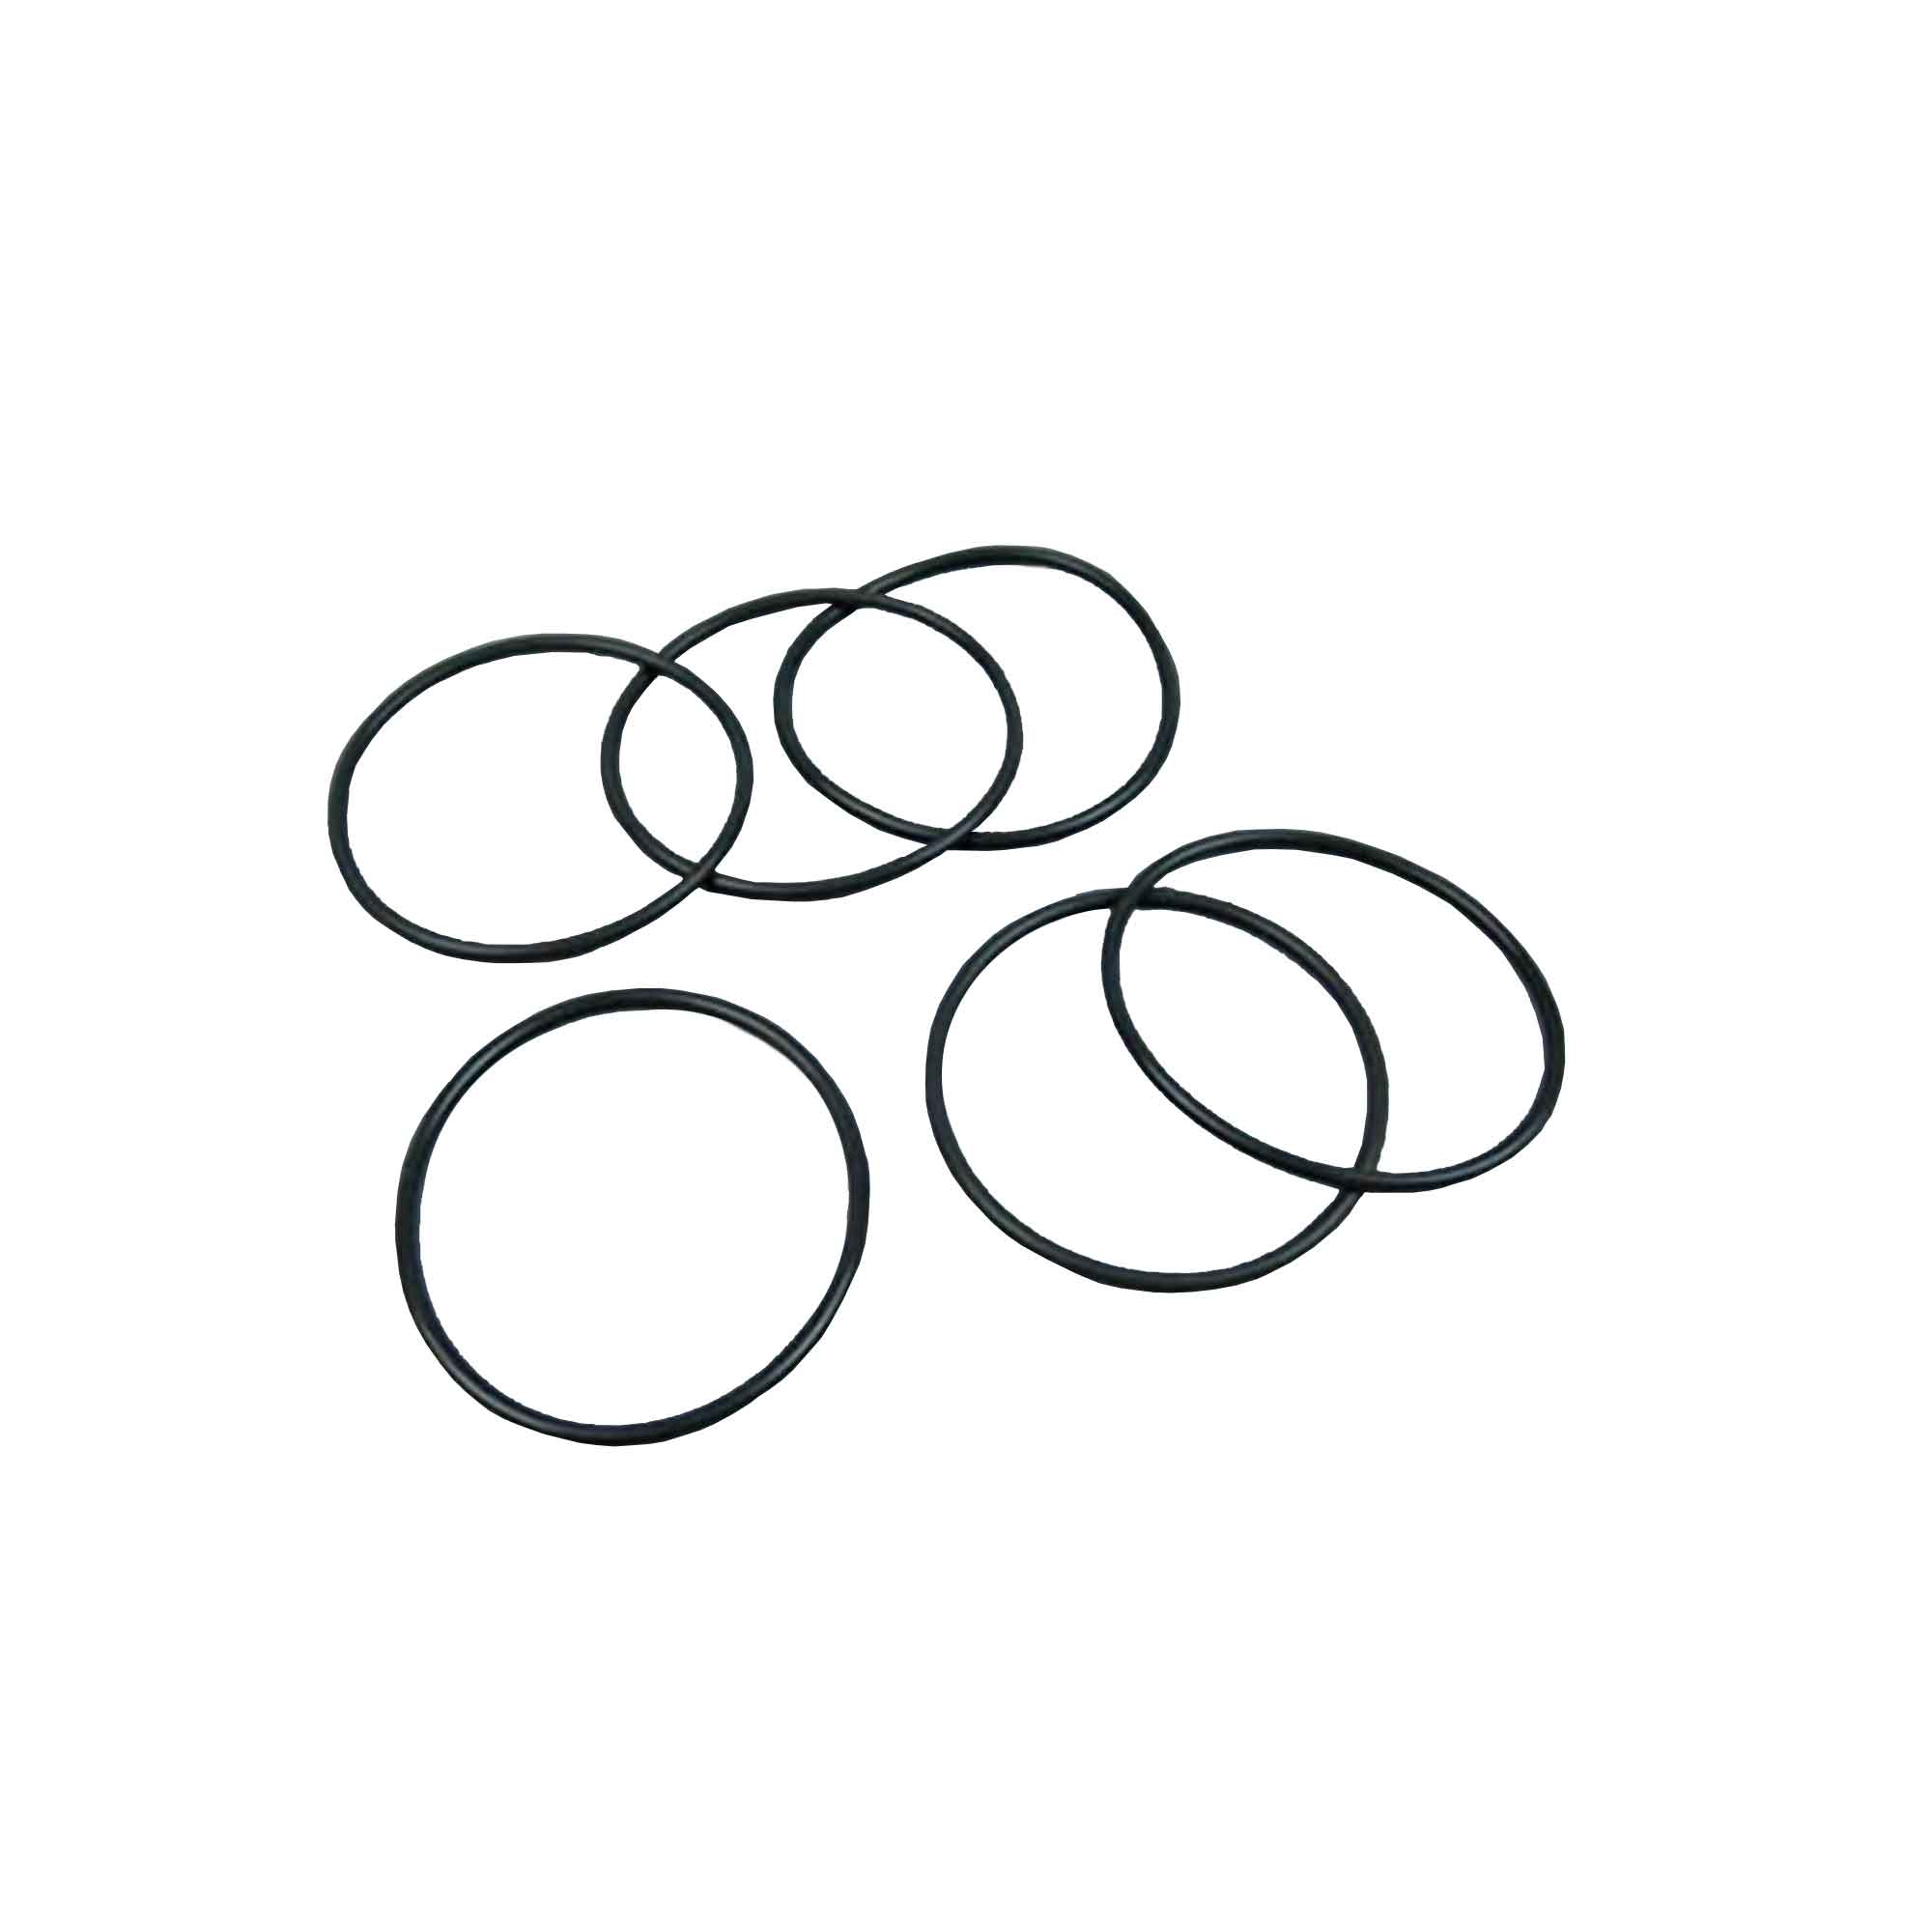 248132 - O-Ring, Package of 6 - PURspray